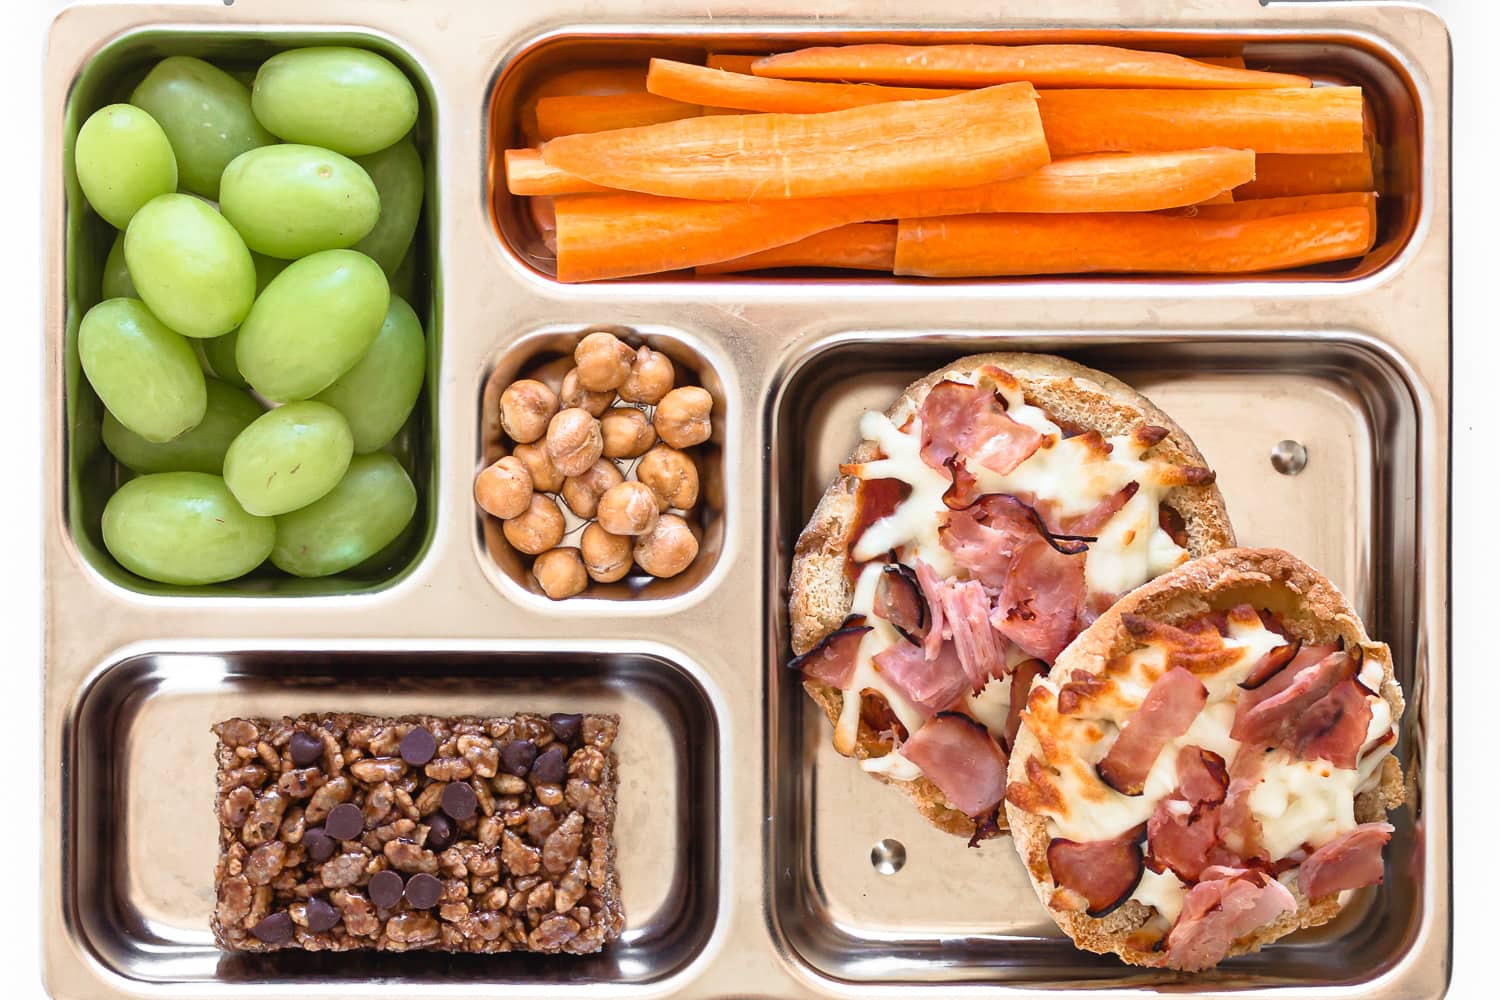 Kids lunch box filled with english muffin pizzas, carrot sticks, green grapes, roasted chickpeas and snack bar.